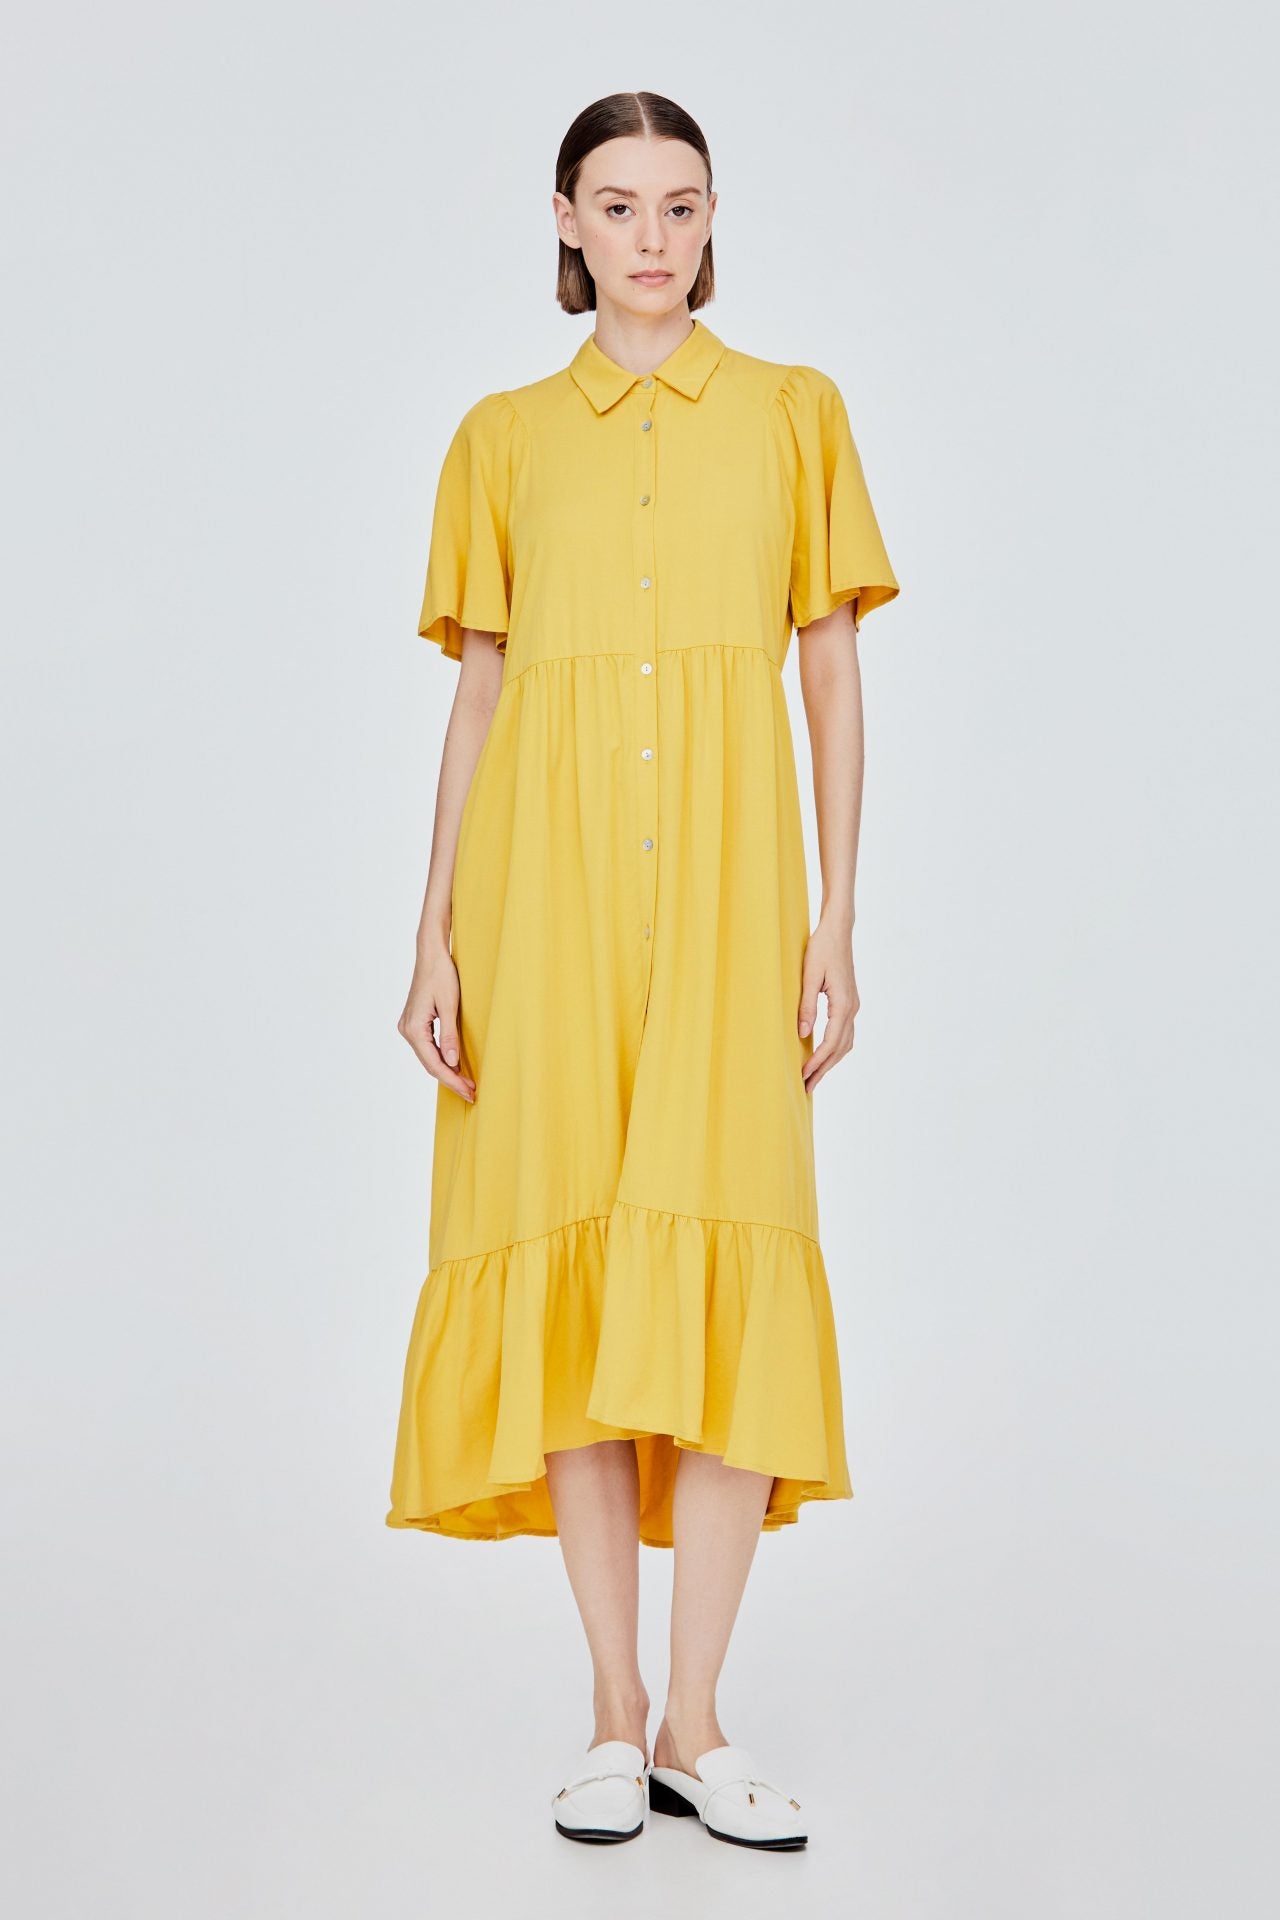 AD 10950 BUTTERFLY BUTTON-DOWN DRESS YELLOW